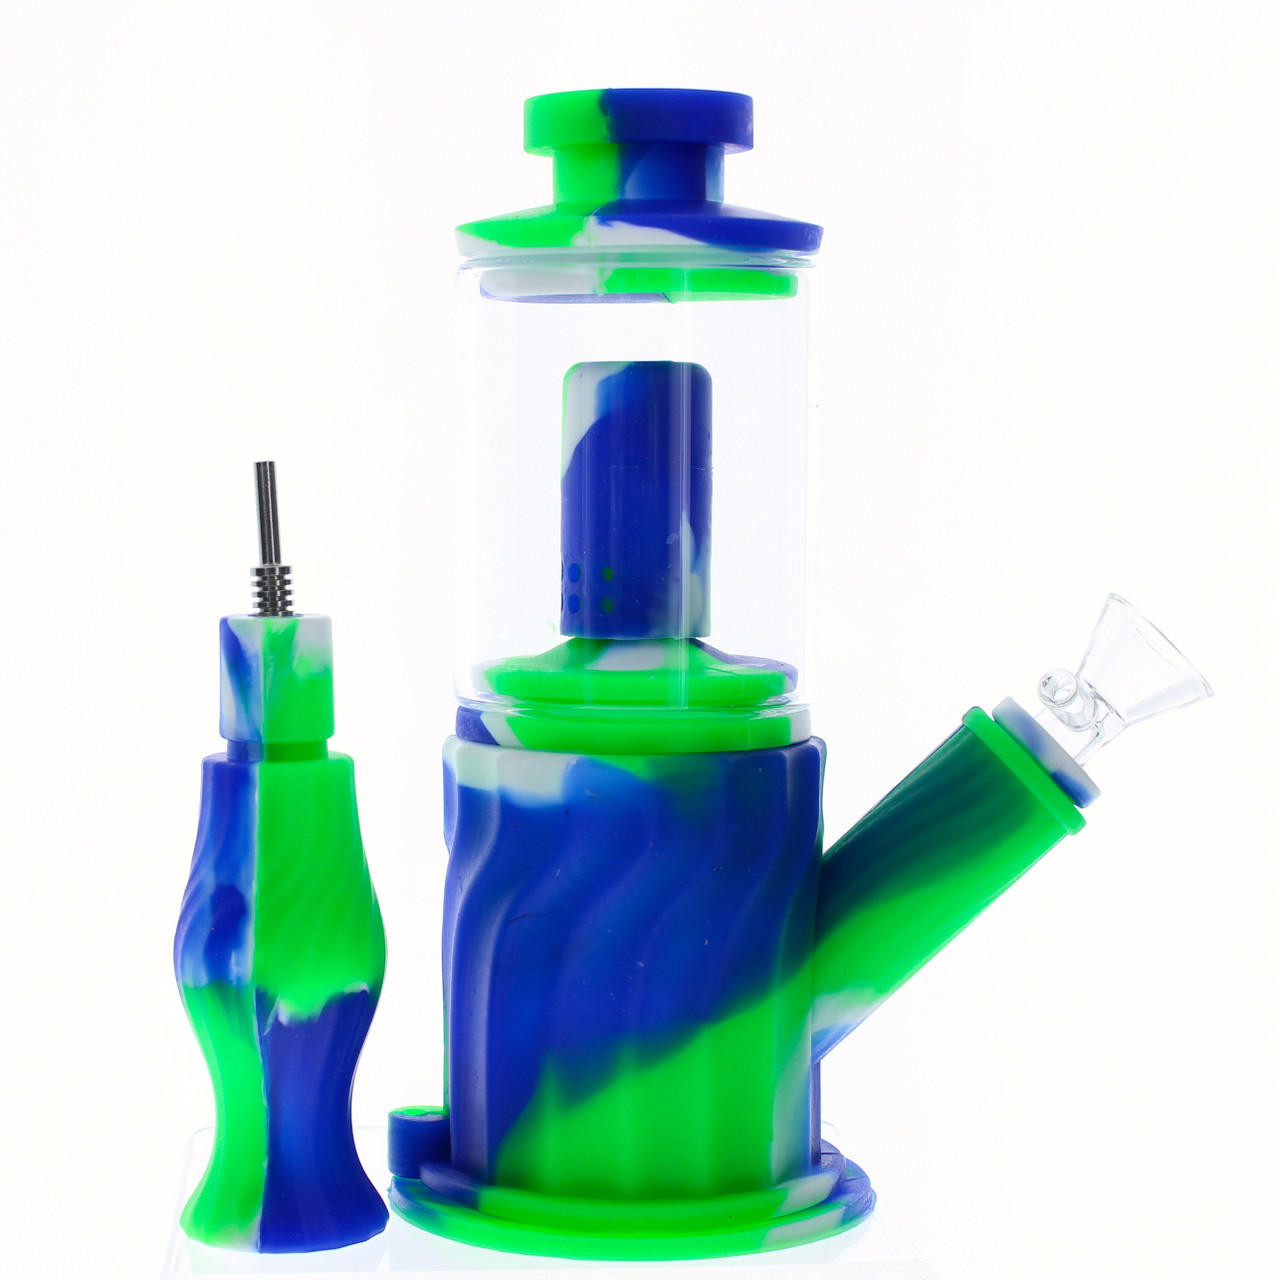 11 4 in 1 Silicone Glass Hybrid Water Pipe, Nectar Collector, & Mini Rig -  Green, White & Blue